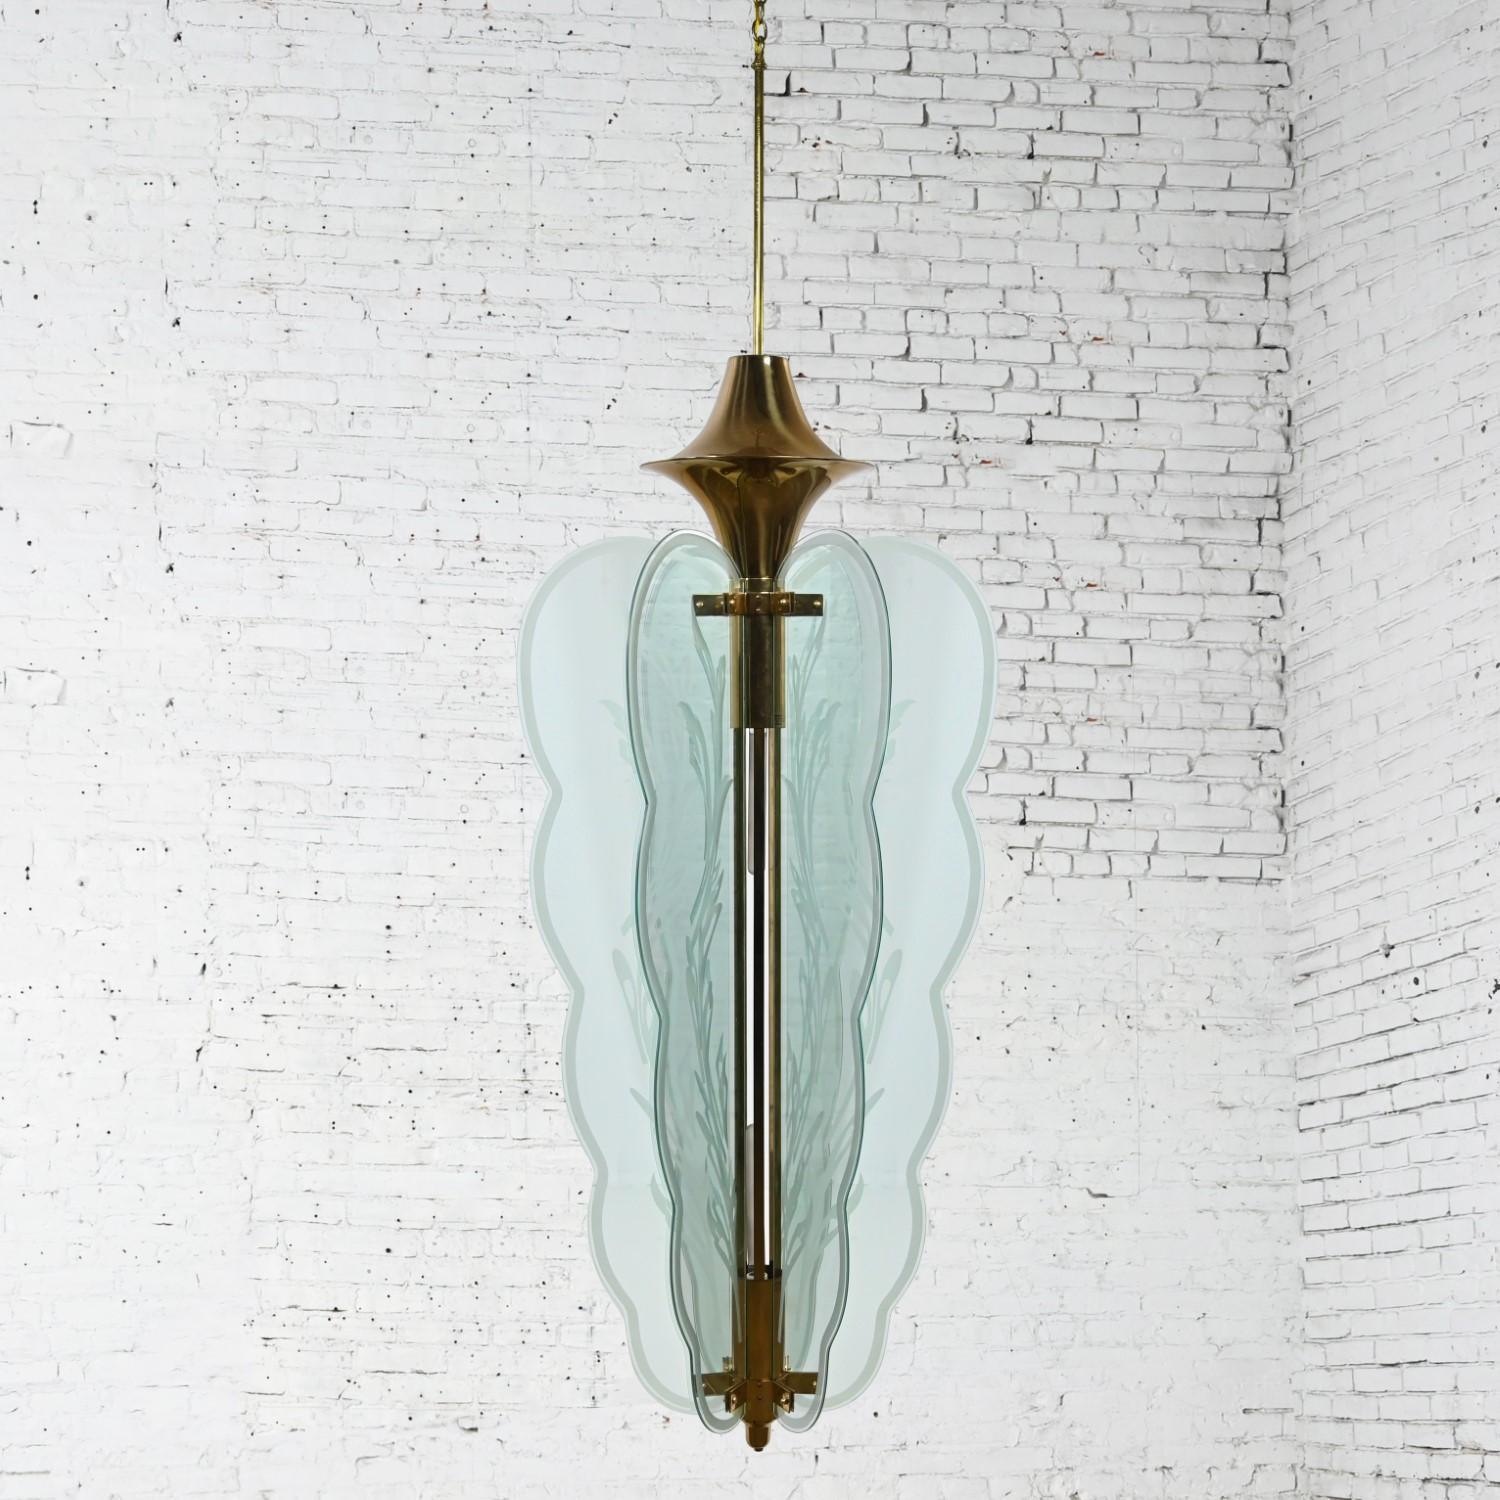 Magnificent vintage Art Deco Revival monumental hanging light fixture or chandelier comprised of six glass “wing” panels with etched details, brass ferrule, shaft, brackets, and a new brass canopy. Beautiful condition, keeping in mind that this is